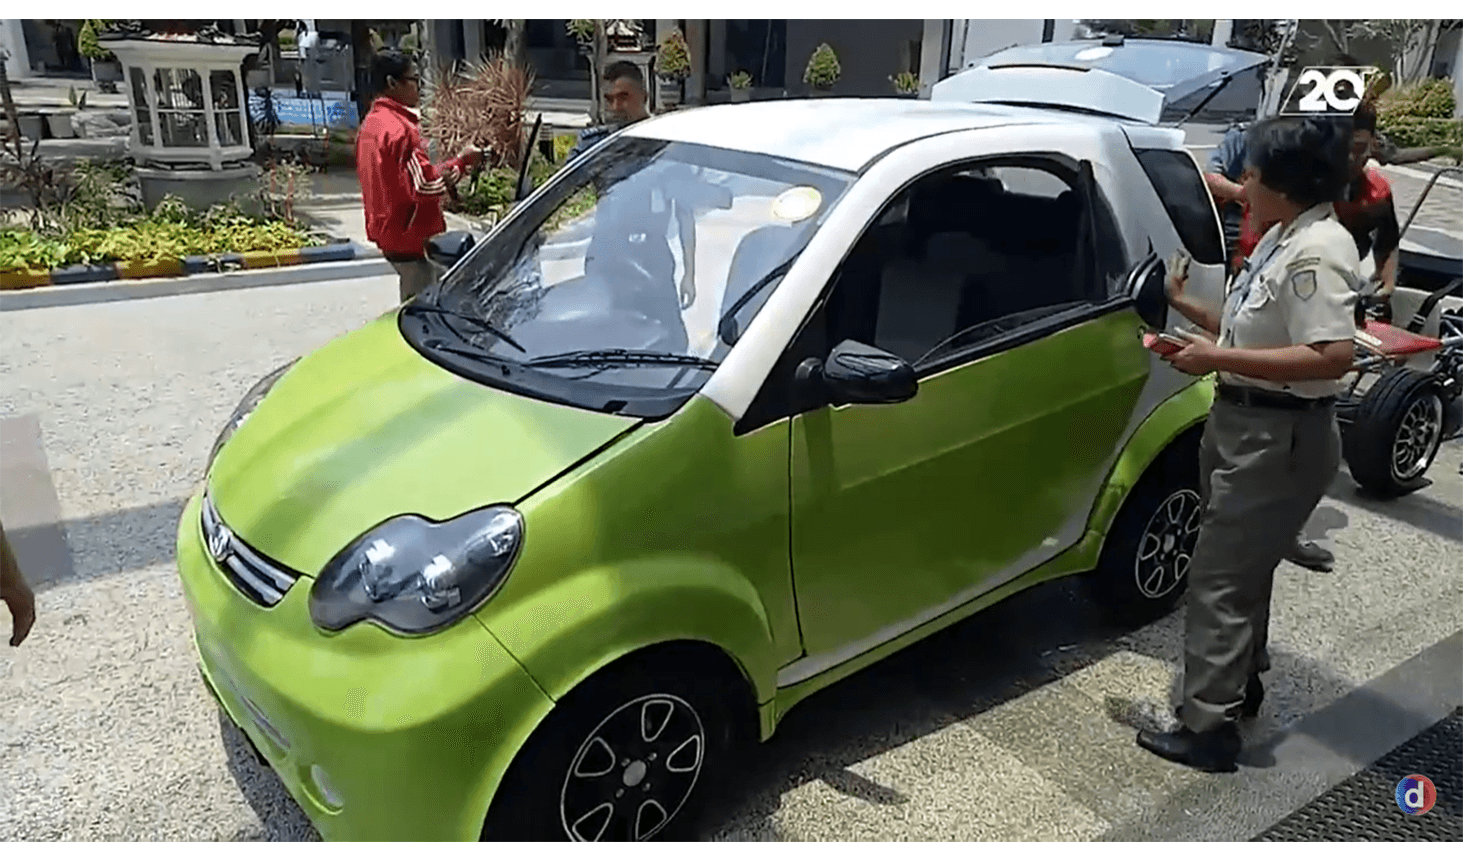 Smart Vi electric city car with induction motor 3 phase